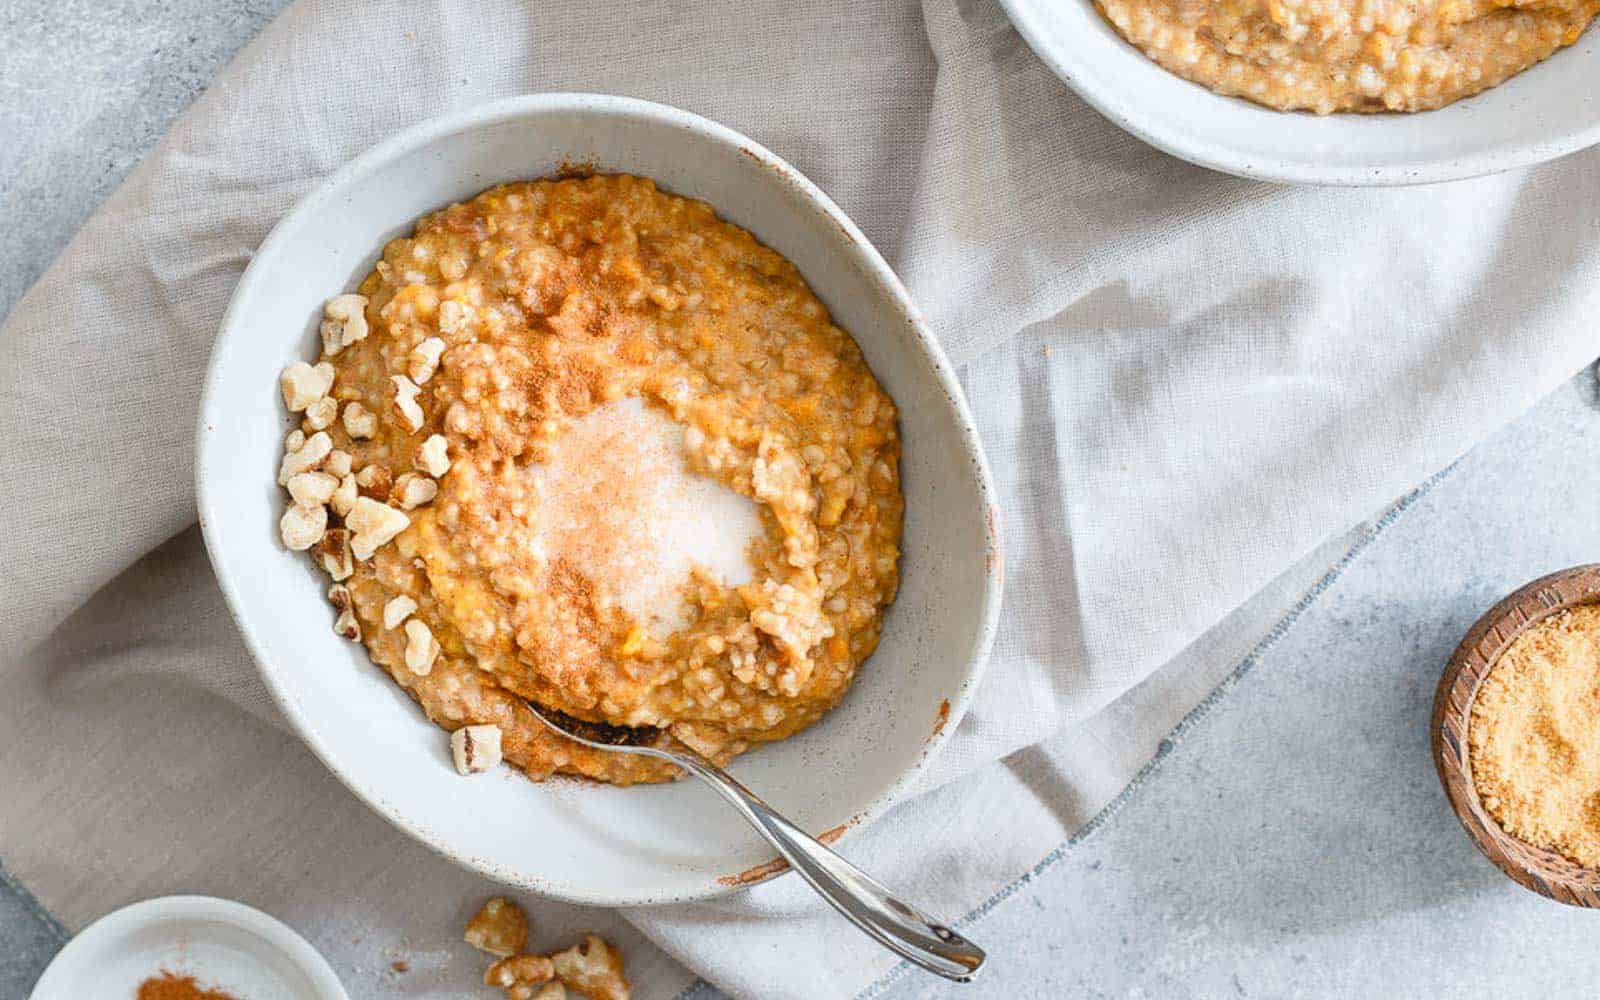 <p>Prepare these sweet potato steel cut oats in your Instant Pot with golden raisins and spices for a warm, easy breakfast. Set it the night before for a hassle-free morning.<br><strong>Get the Recipe: </strong><a href="https://www.runningtothekitchen.com/instant-pot-sweet-potato-steel-cut-oats/?utm_source=msn&utm_medium=page&utm_campaign=msn">Instant Pot Sweet Potato Steel Cut Oats</a></p>